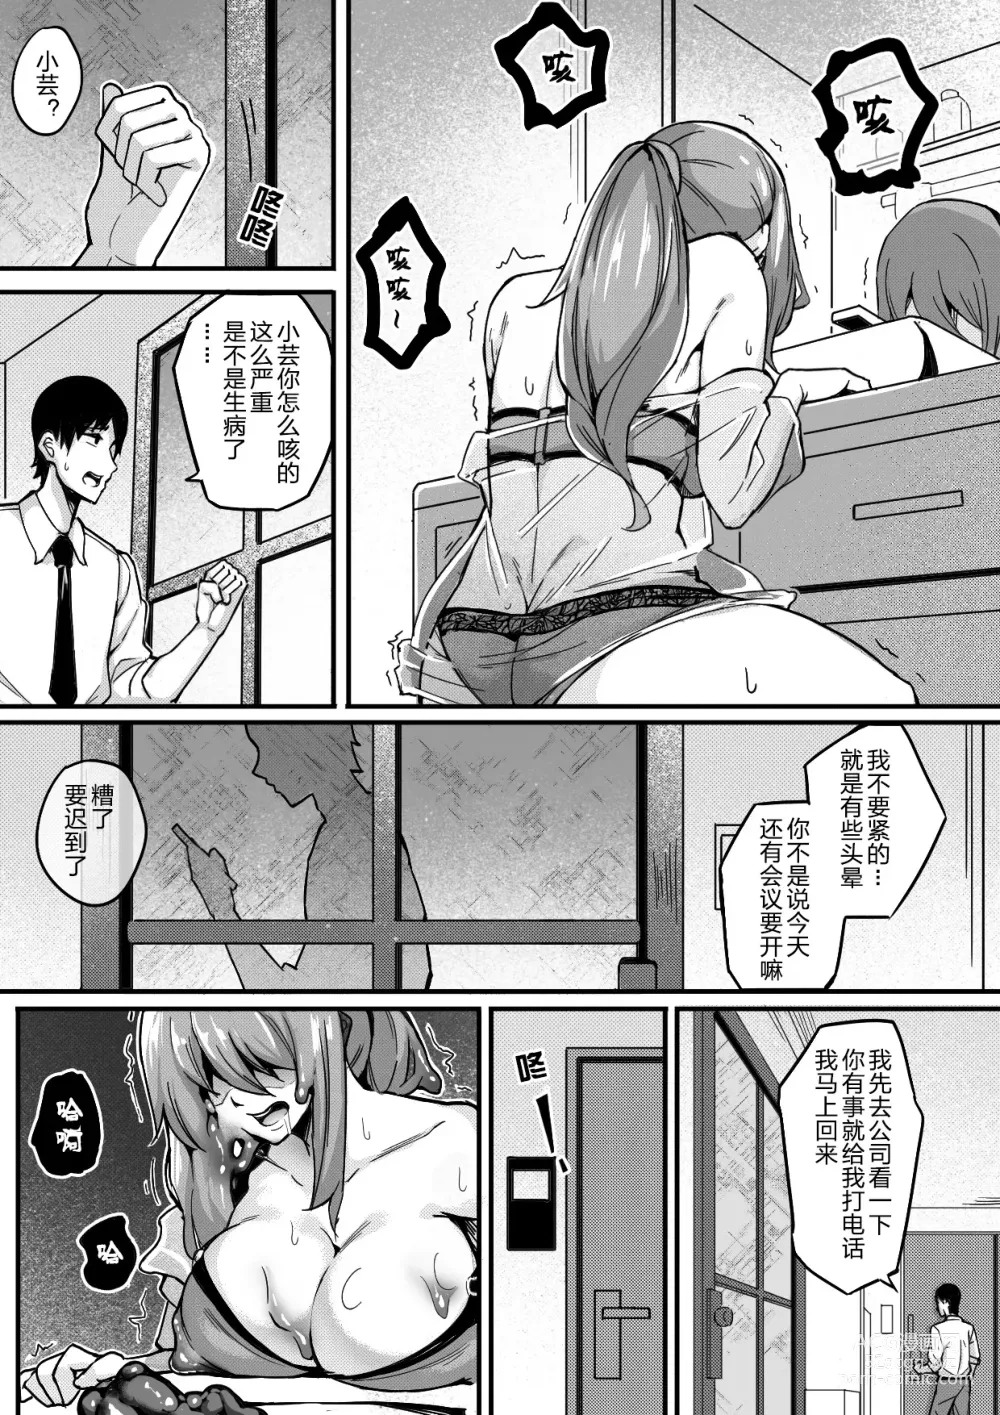 Page 4 of doujinshi LiveMeat05